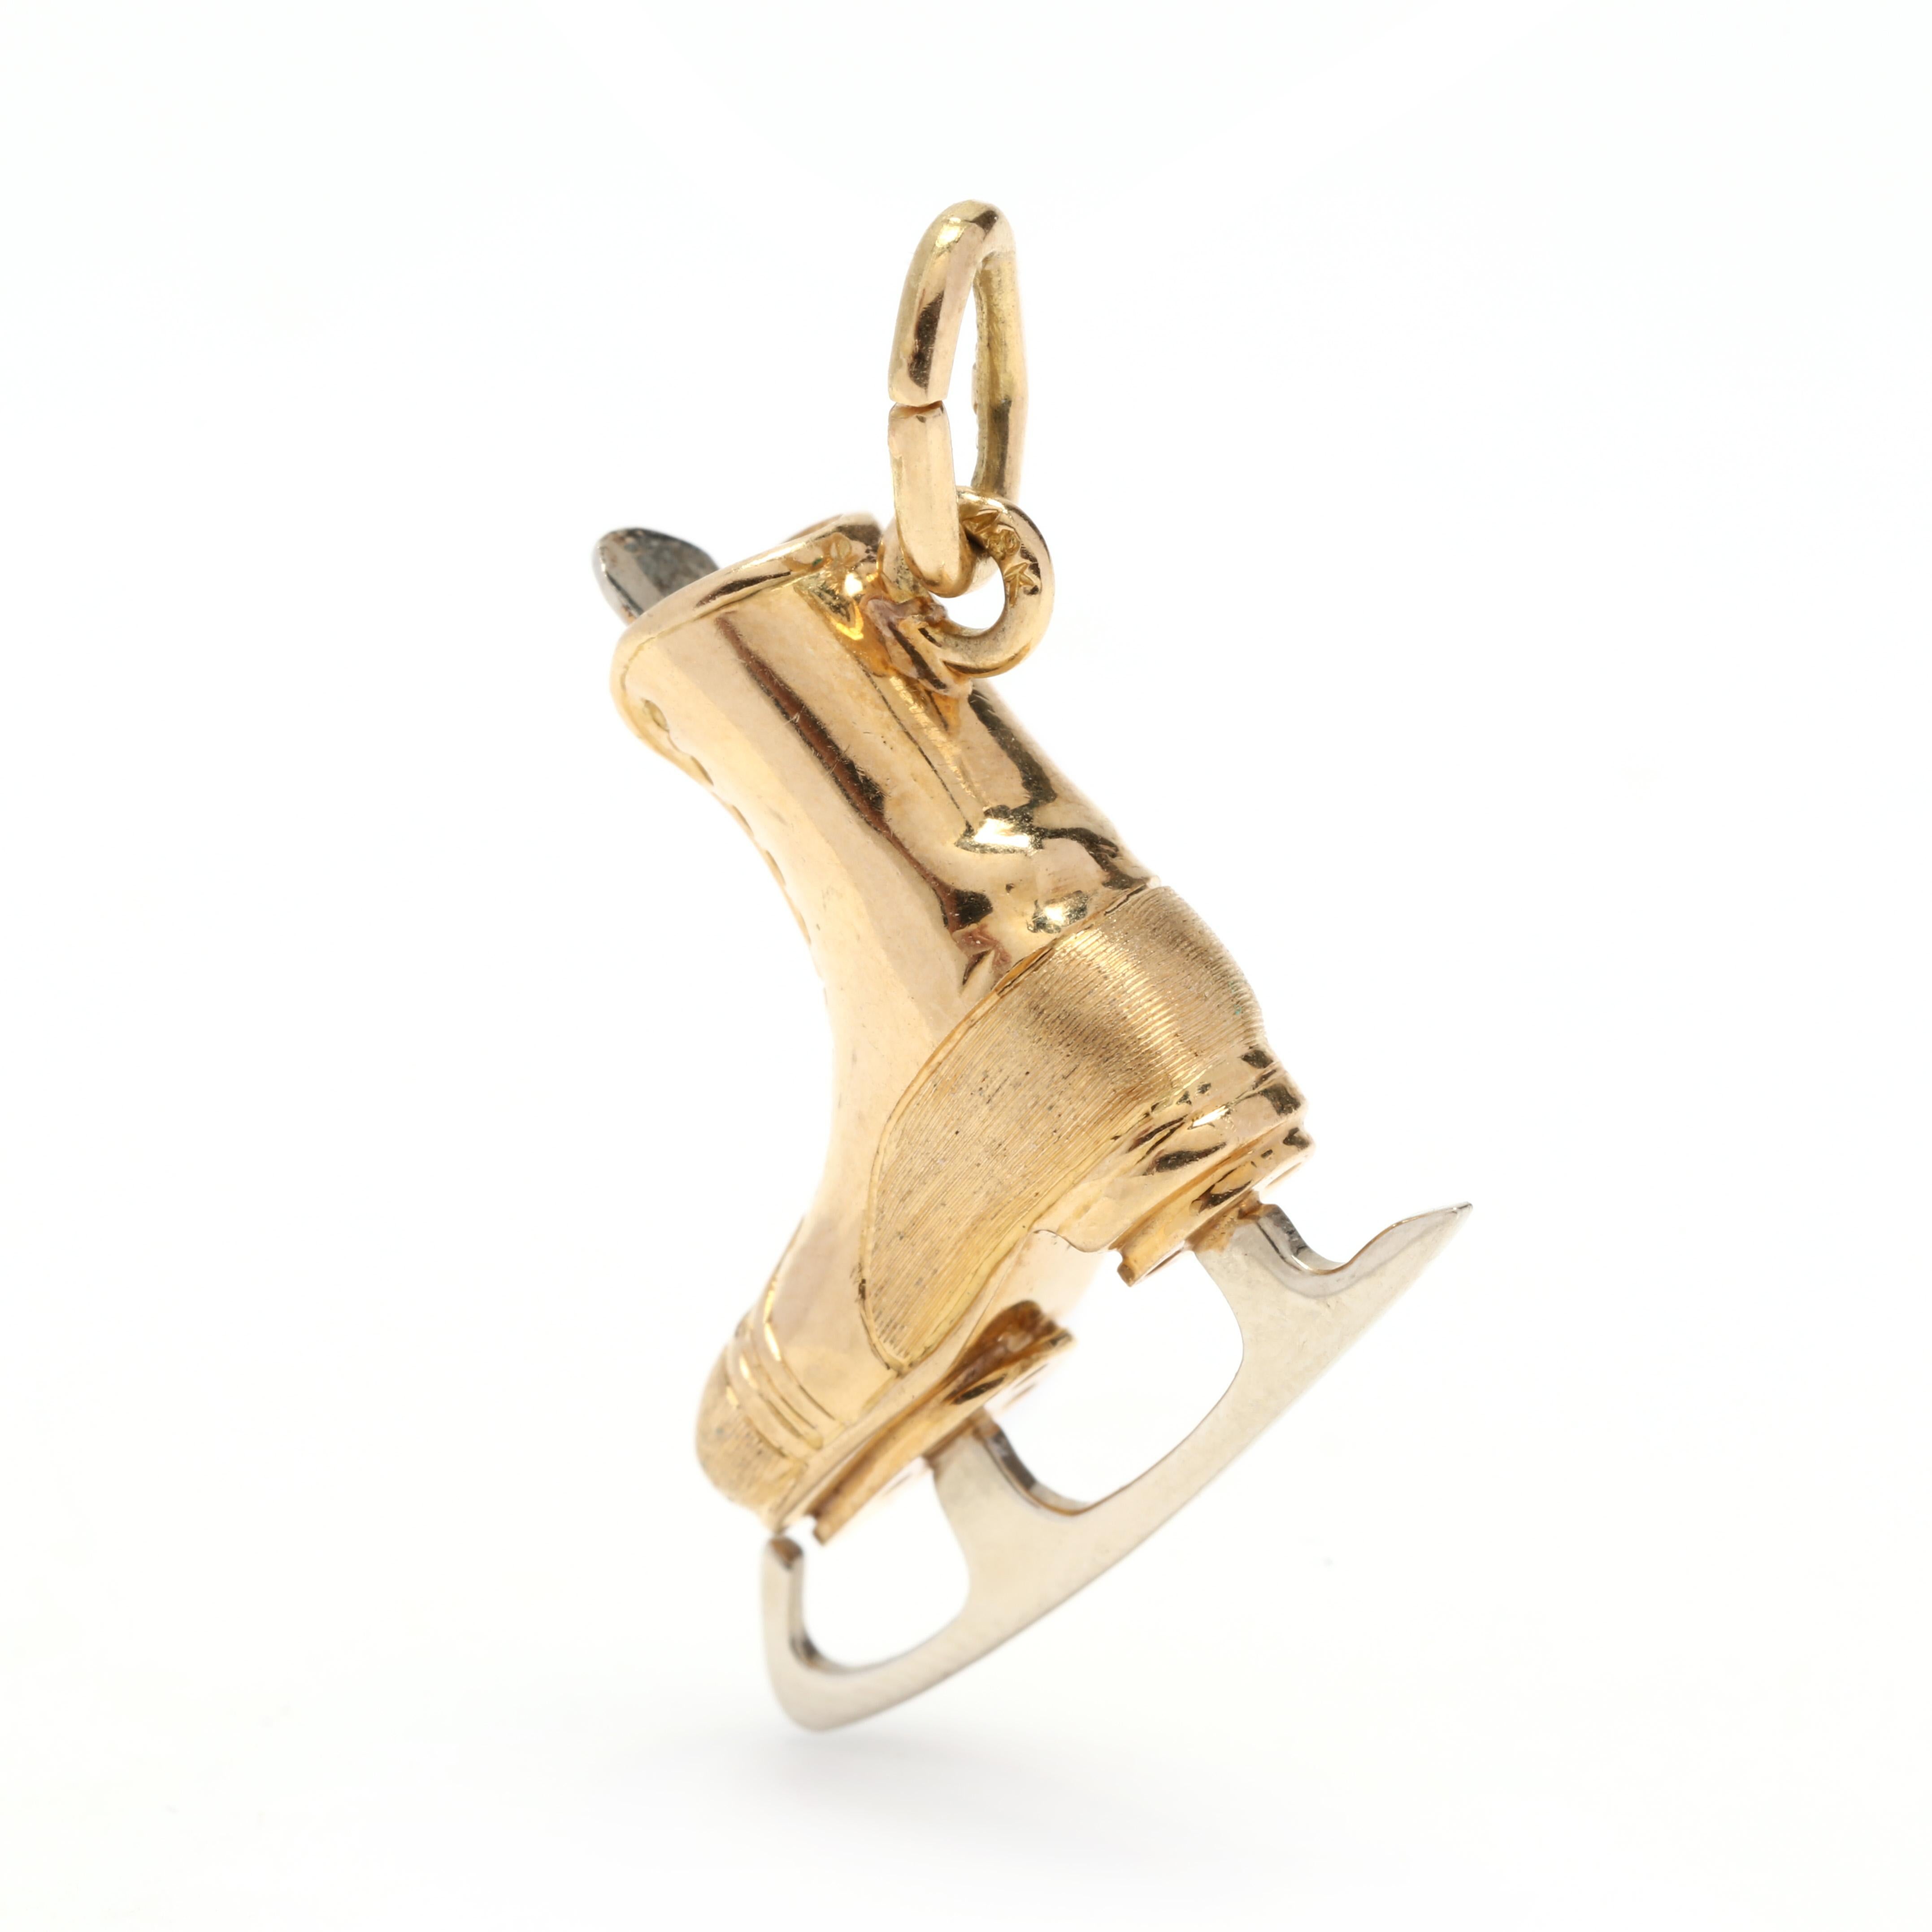 A vintage 18 karat bicolor gold ice skate charm. This 3 dimensional charm features a yellow gold shoe with a white gold blade and shoe tongue and with a thin oval bail.



Length: 3/4 in.



Width: 3/4 in.



Weight: 2.1 dwts.